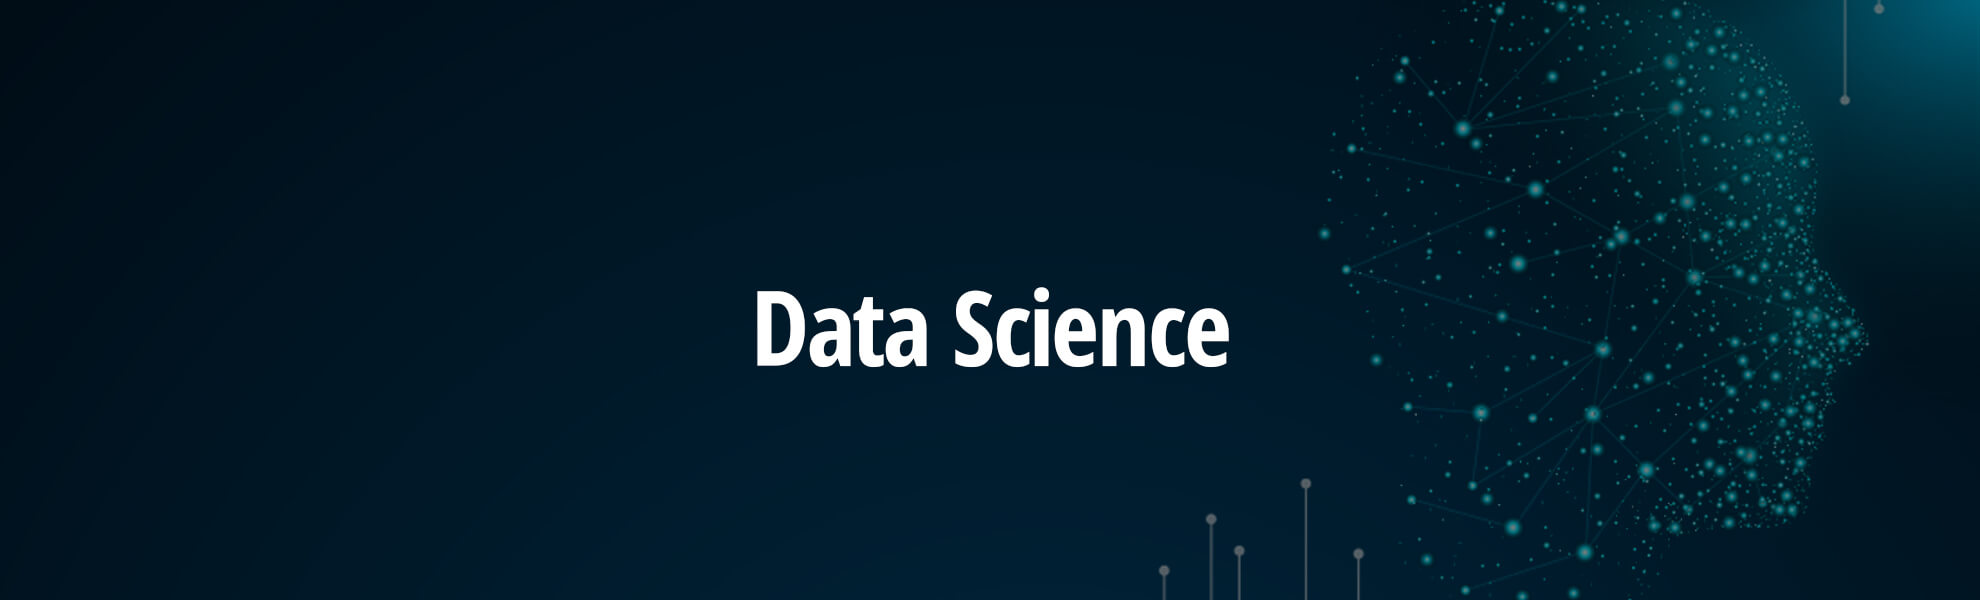 Page Banner - Data Science